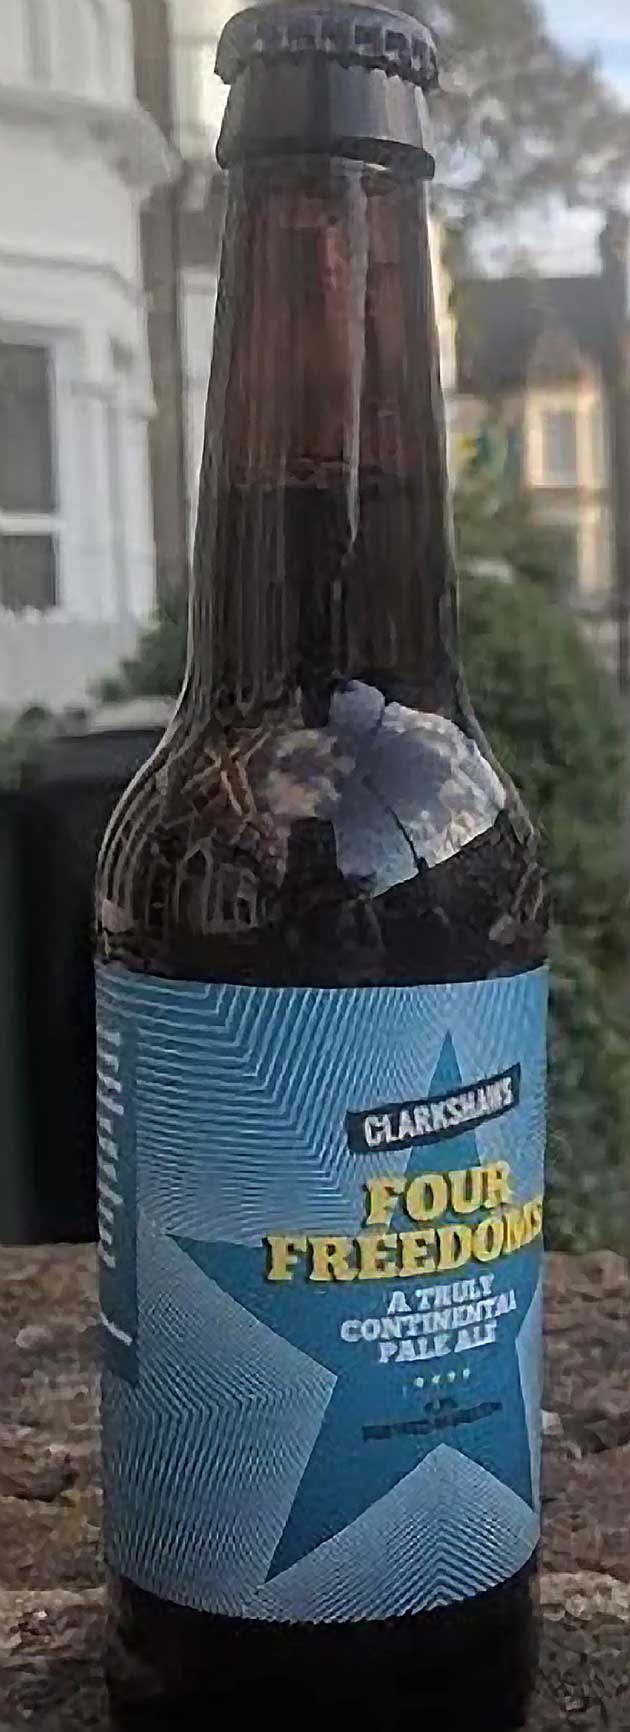 Bottle of Four Freedoms Ale brewed by Clarkshaws